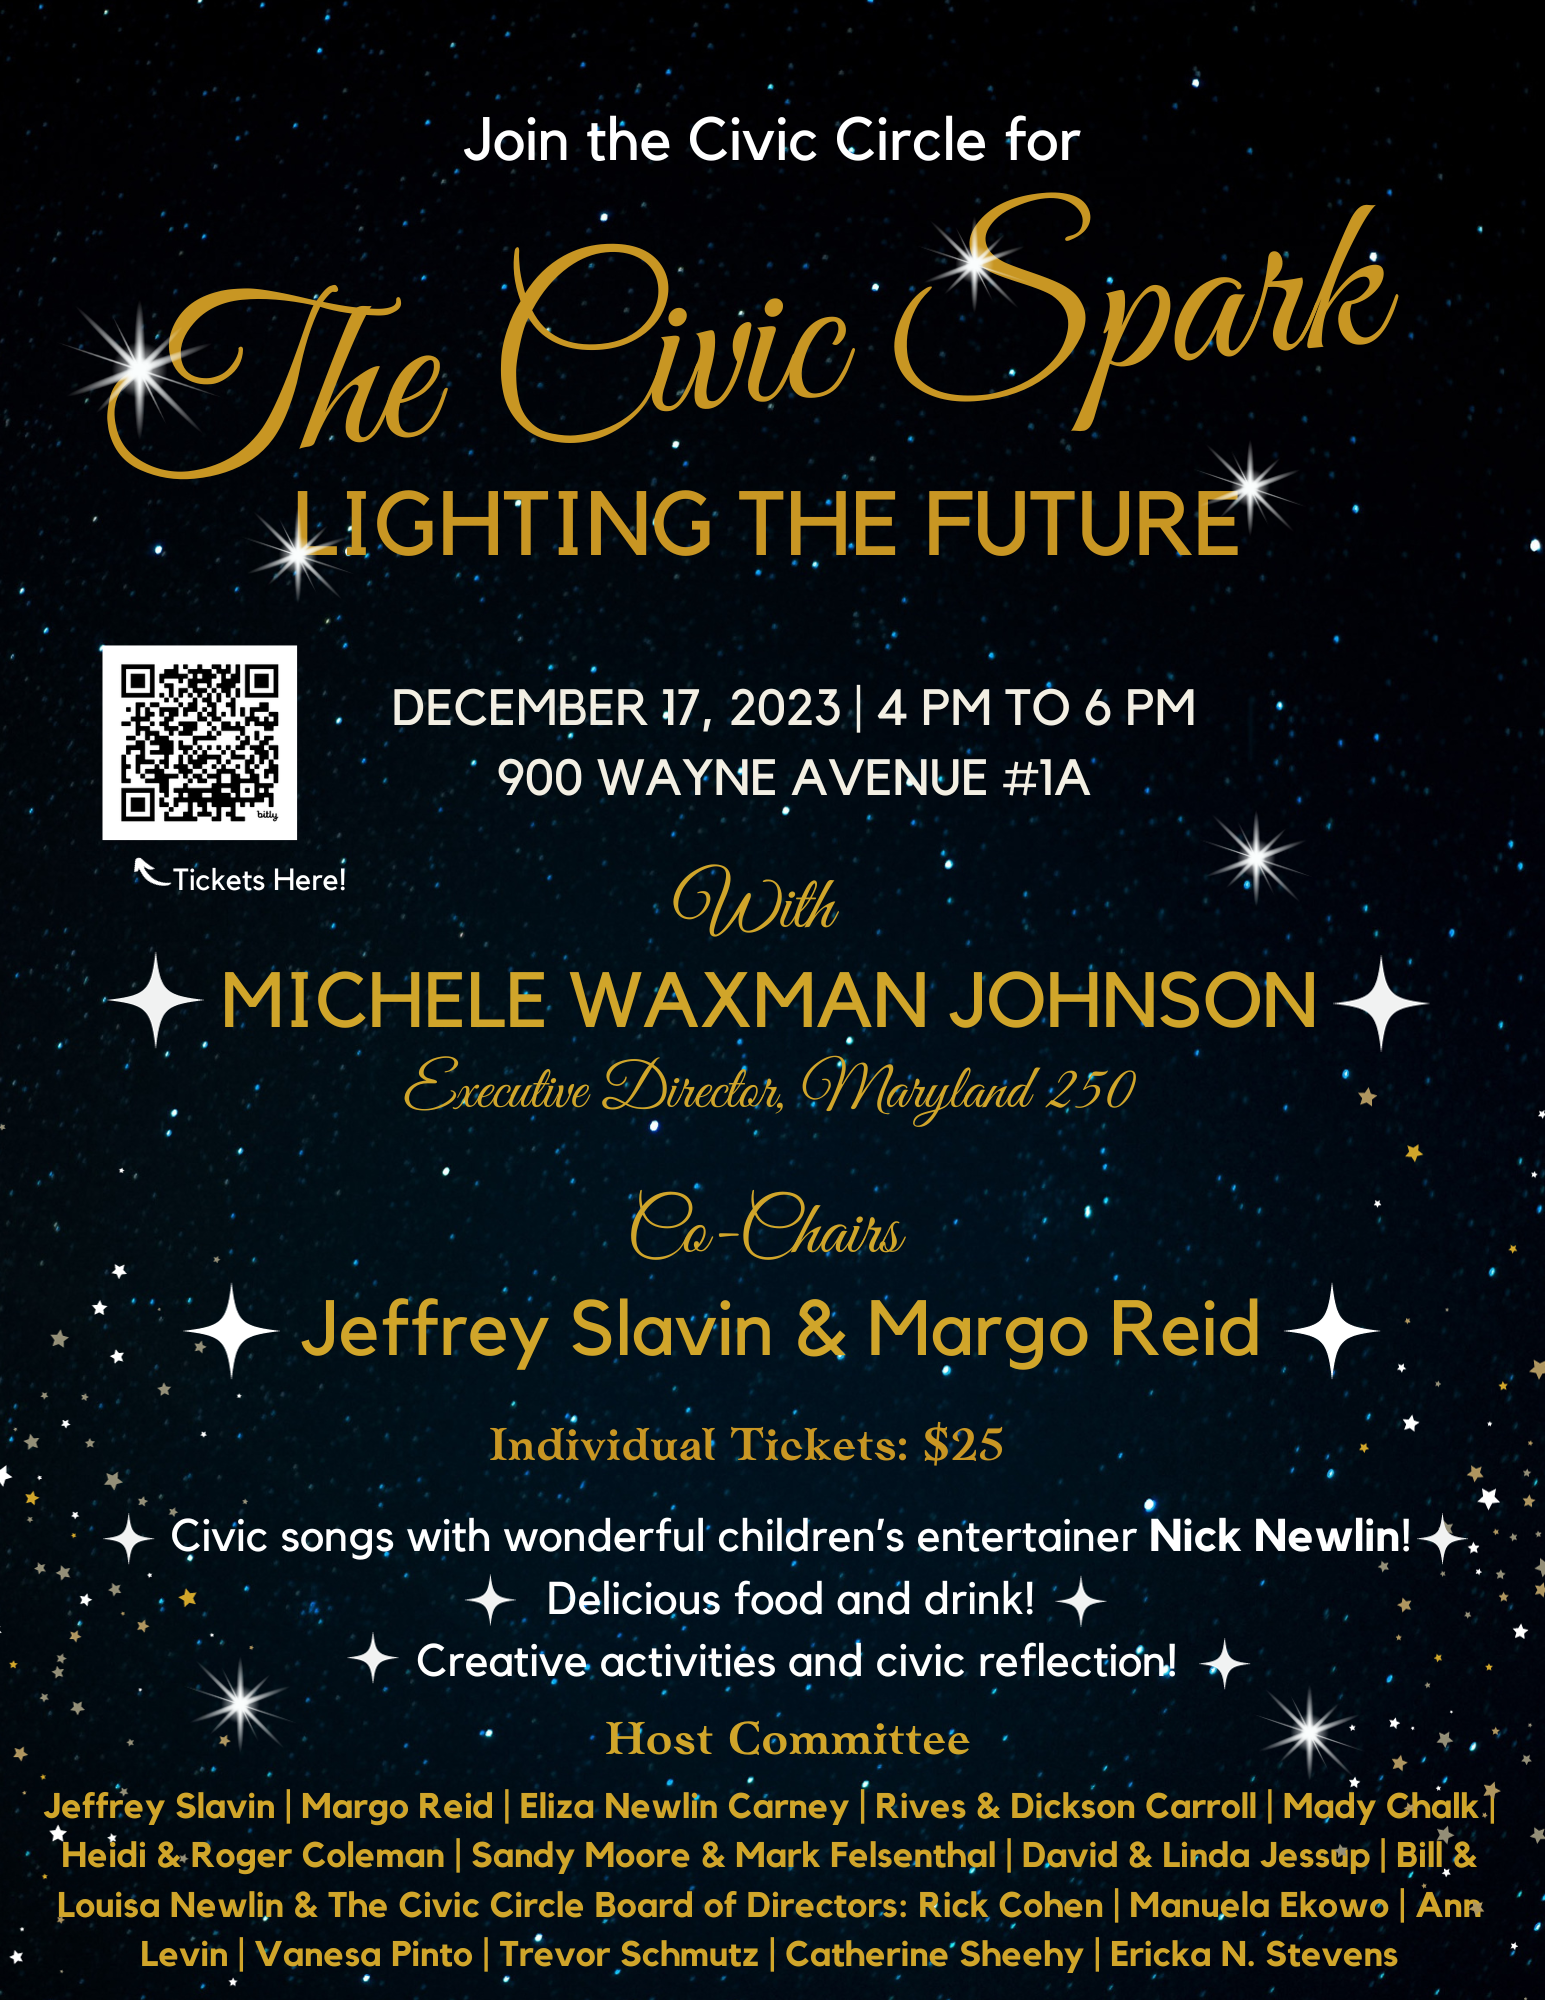 Join The Civic Circle for The Civic Spark: Lighting the Future. December 17, 2023 | 4 PM to 6 PM 900 Wayne Avenue #1A Civic songs with wonderful children's entertainer Nick Newlin! | Delicious food and drink! | Creative activities and civic reflection!